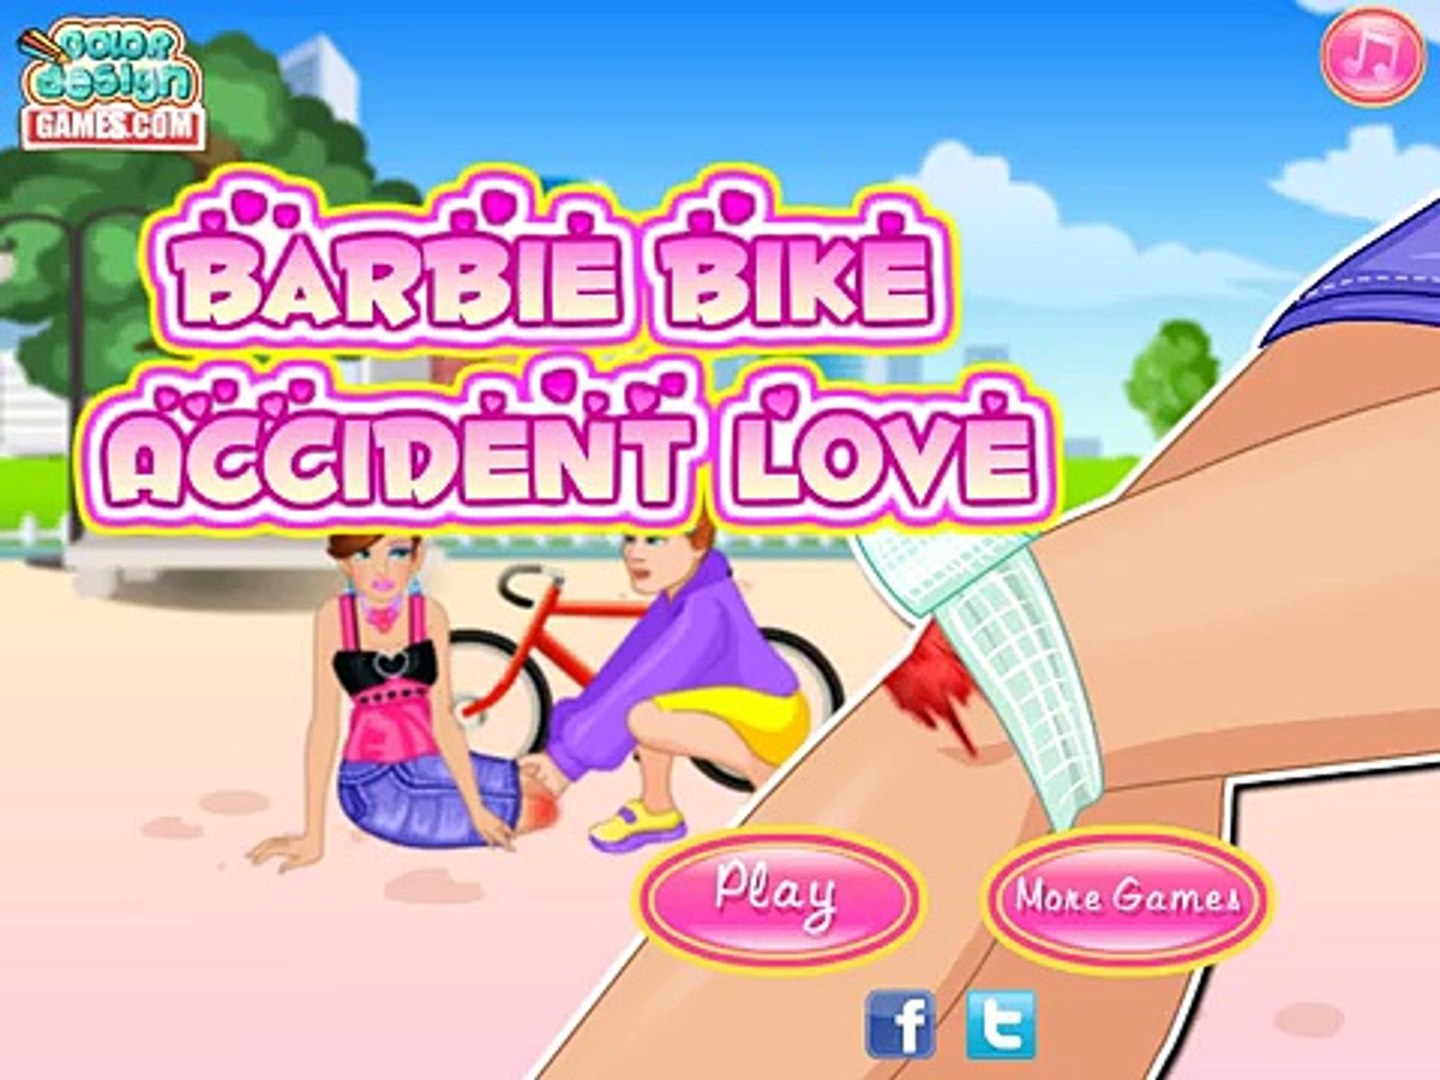 Barbie Bike Accident Love - Best Game for Little Girls - video Dailymotion